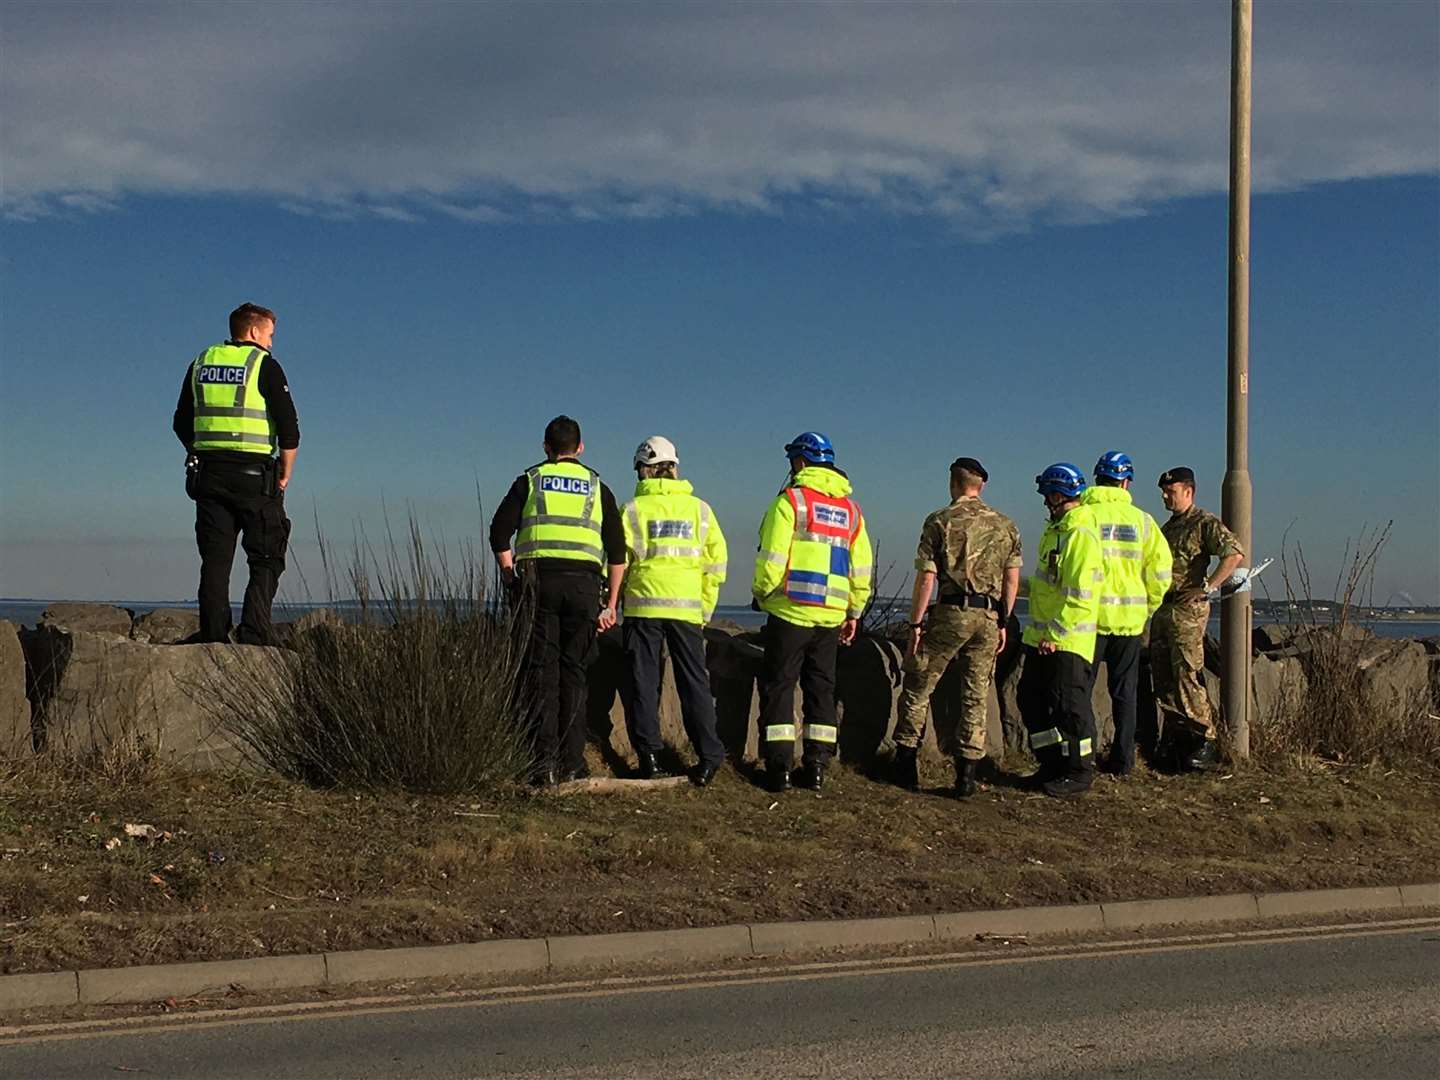 Members of the Royal Navy bomb disposal team looking at the object while it was still submersed near Kessock Bridge in Inverness.